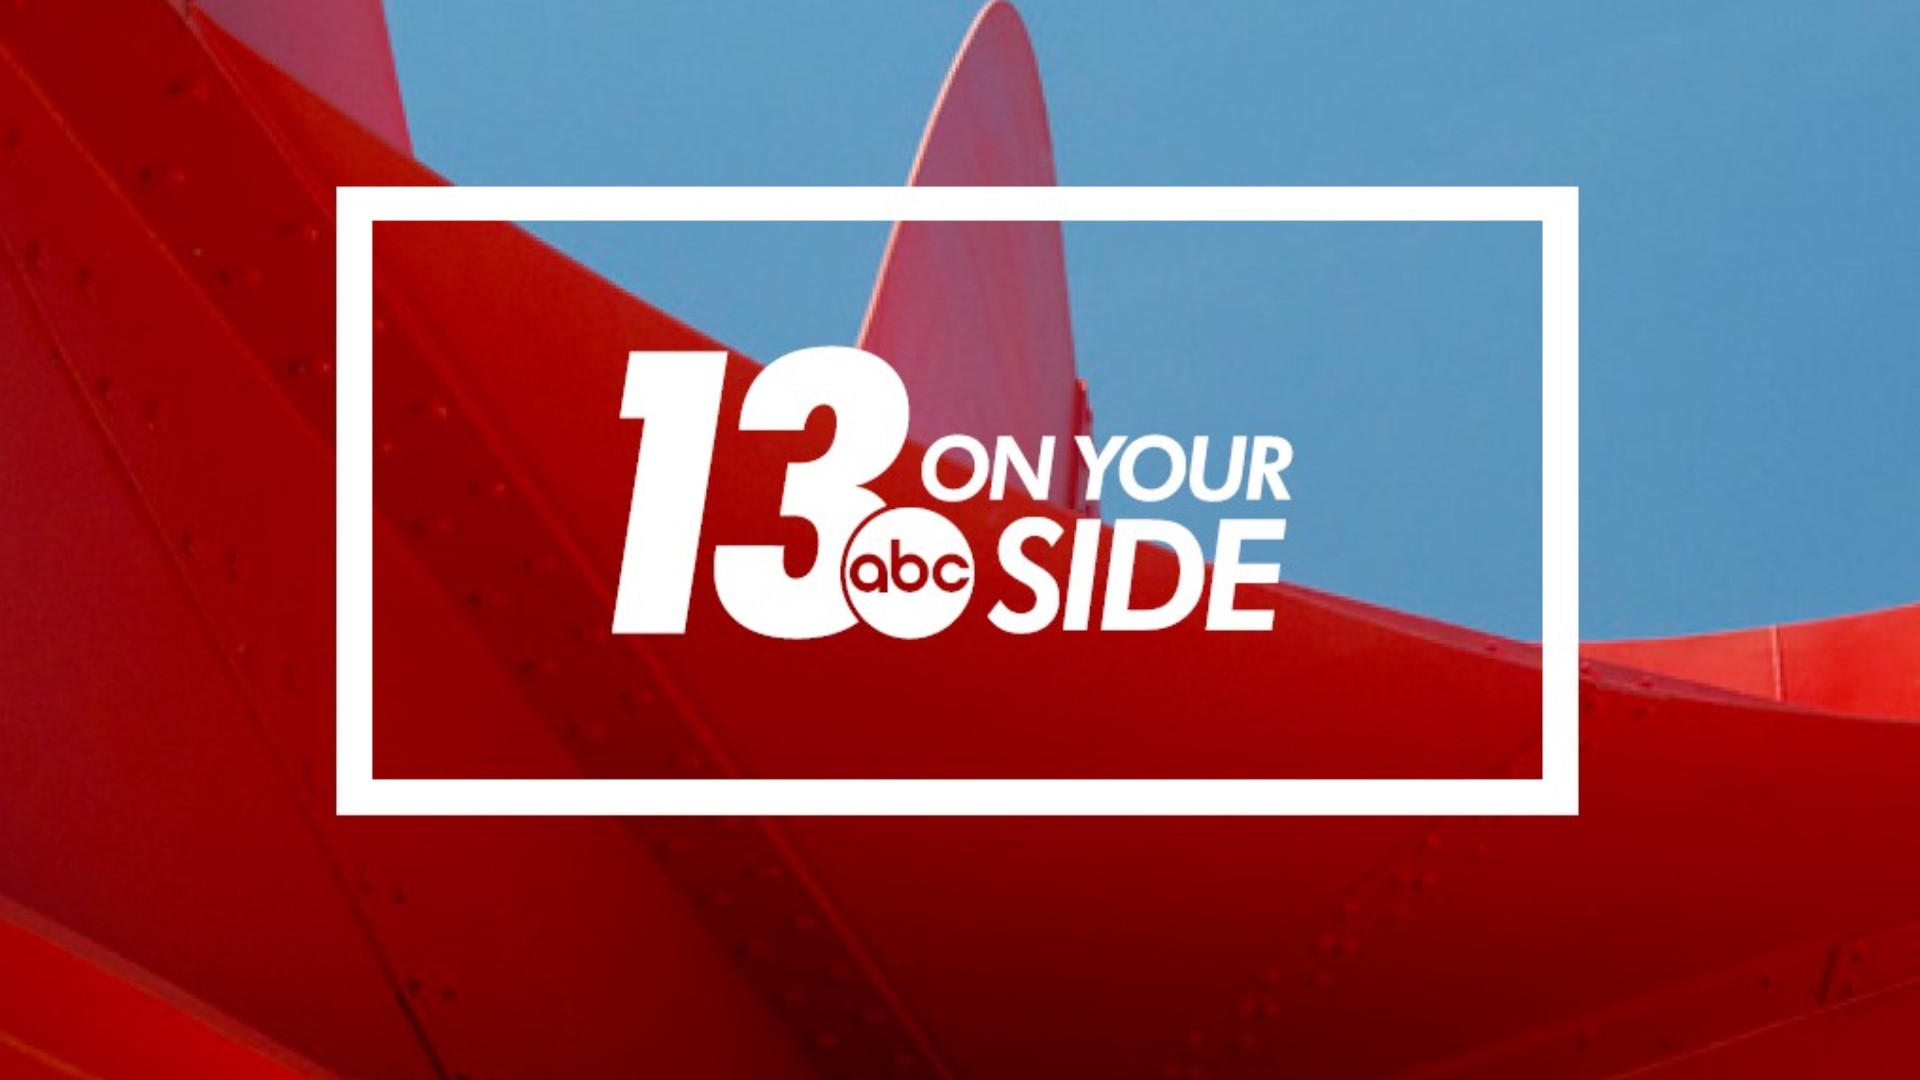 Join 13 ON YOUR SIDE at Noon for the latest midday news, sports and weather. 